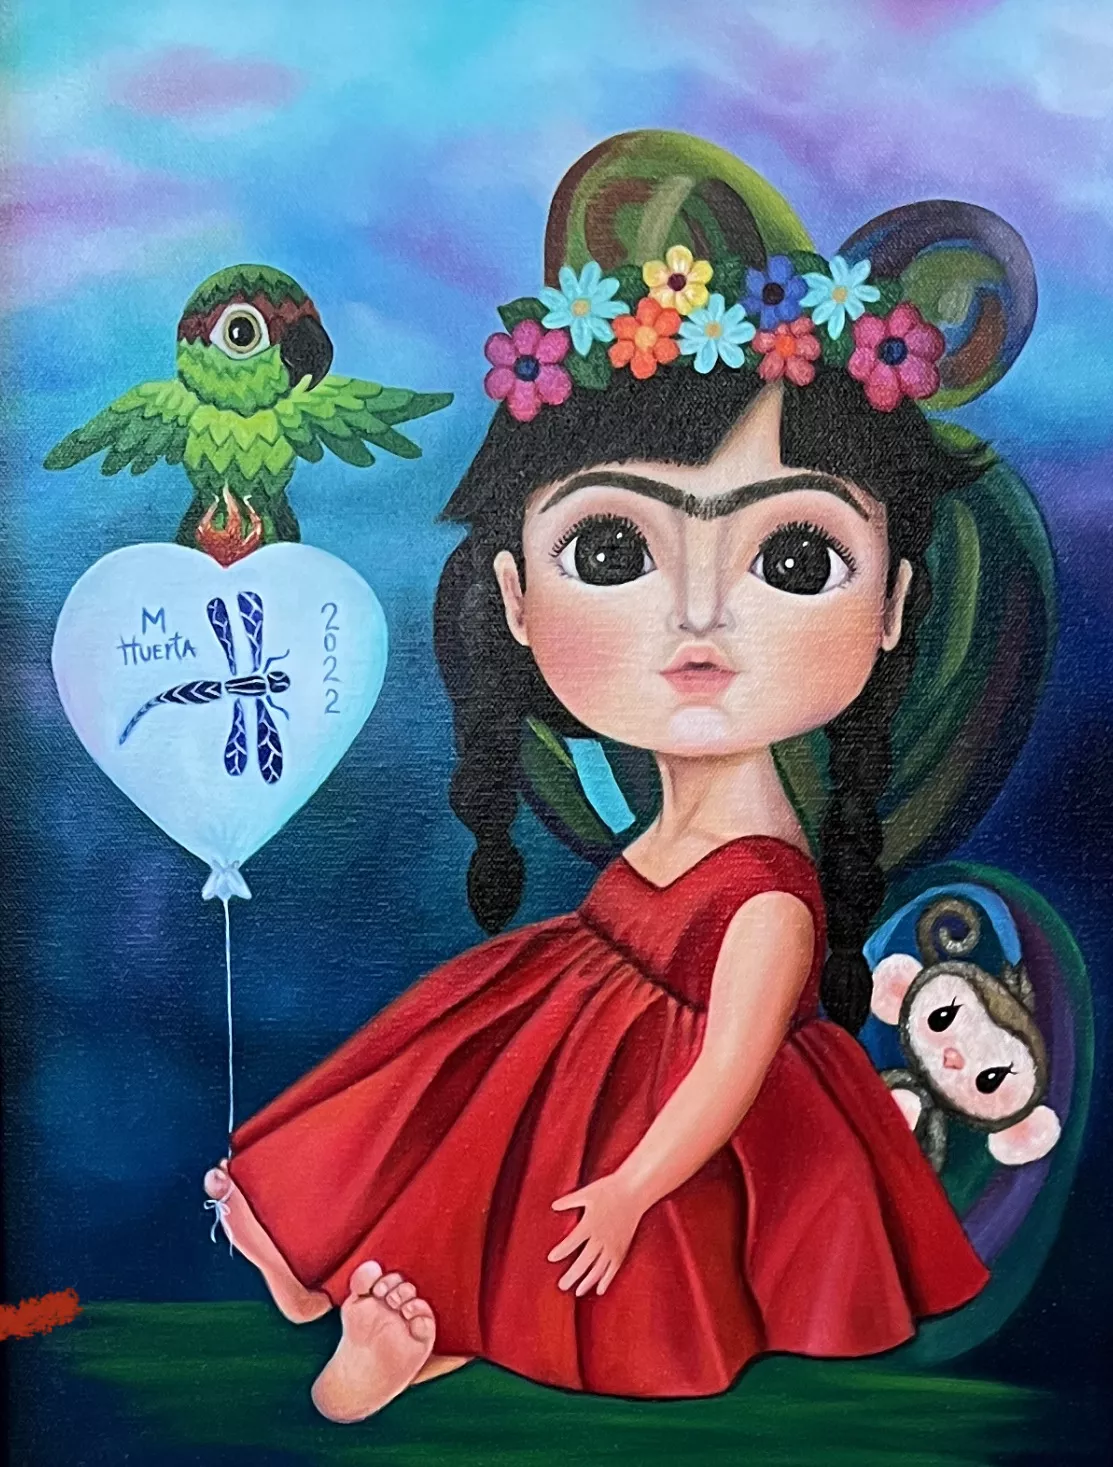 Maru Huerta Pies, Para Que Los Quiero, Si Tengo Alas Para Volar (Why Would I Want Feet When I Have Wings To Fly), 2022  Oils on canvas. 14”x20”  The artist describes the piece as representing a woman’s pride and love for her family. On an ombre blue sky with soft pink clouds sits a barefoot and wide eyed girl with a unibrow. She wears a red dress, a crown of flowers, and her hair hanging in two braids. A small monkey peeks from behind her. A green bird flutters its wings while standing on a heart shaped bal